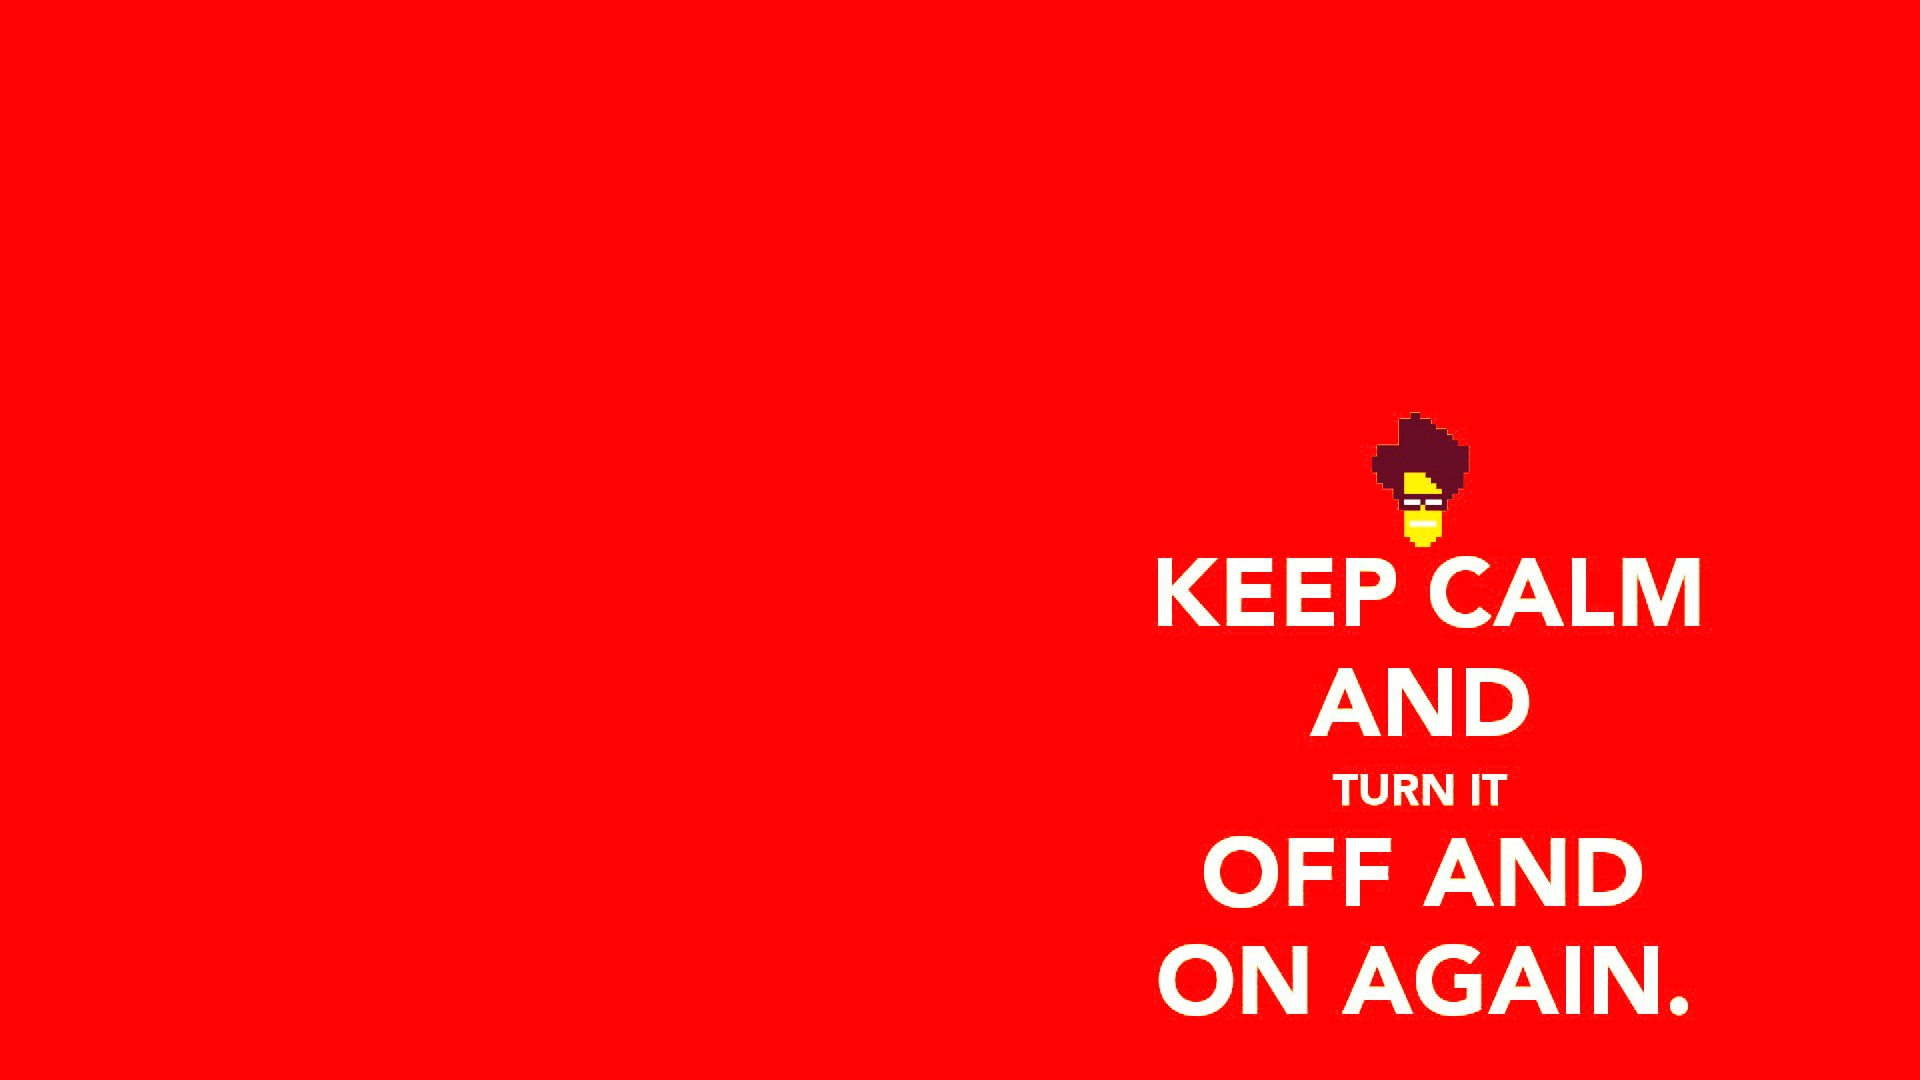 Text funny facts TV series Keep Calm and simple background IT crowd wallpaperx1080